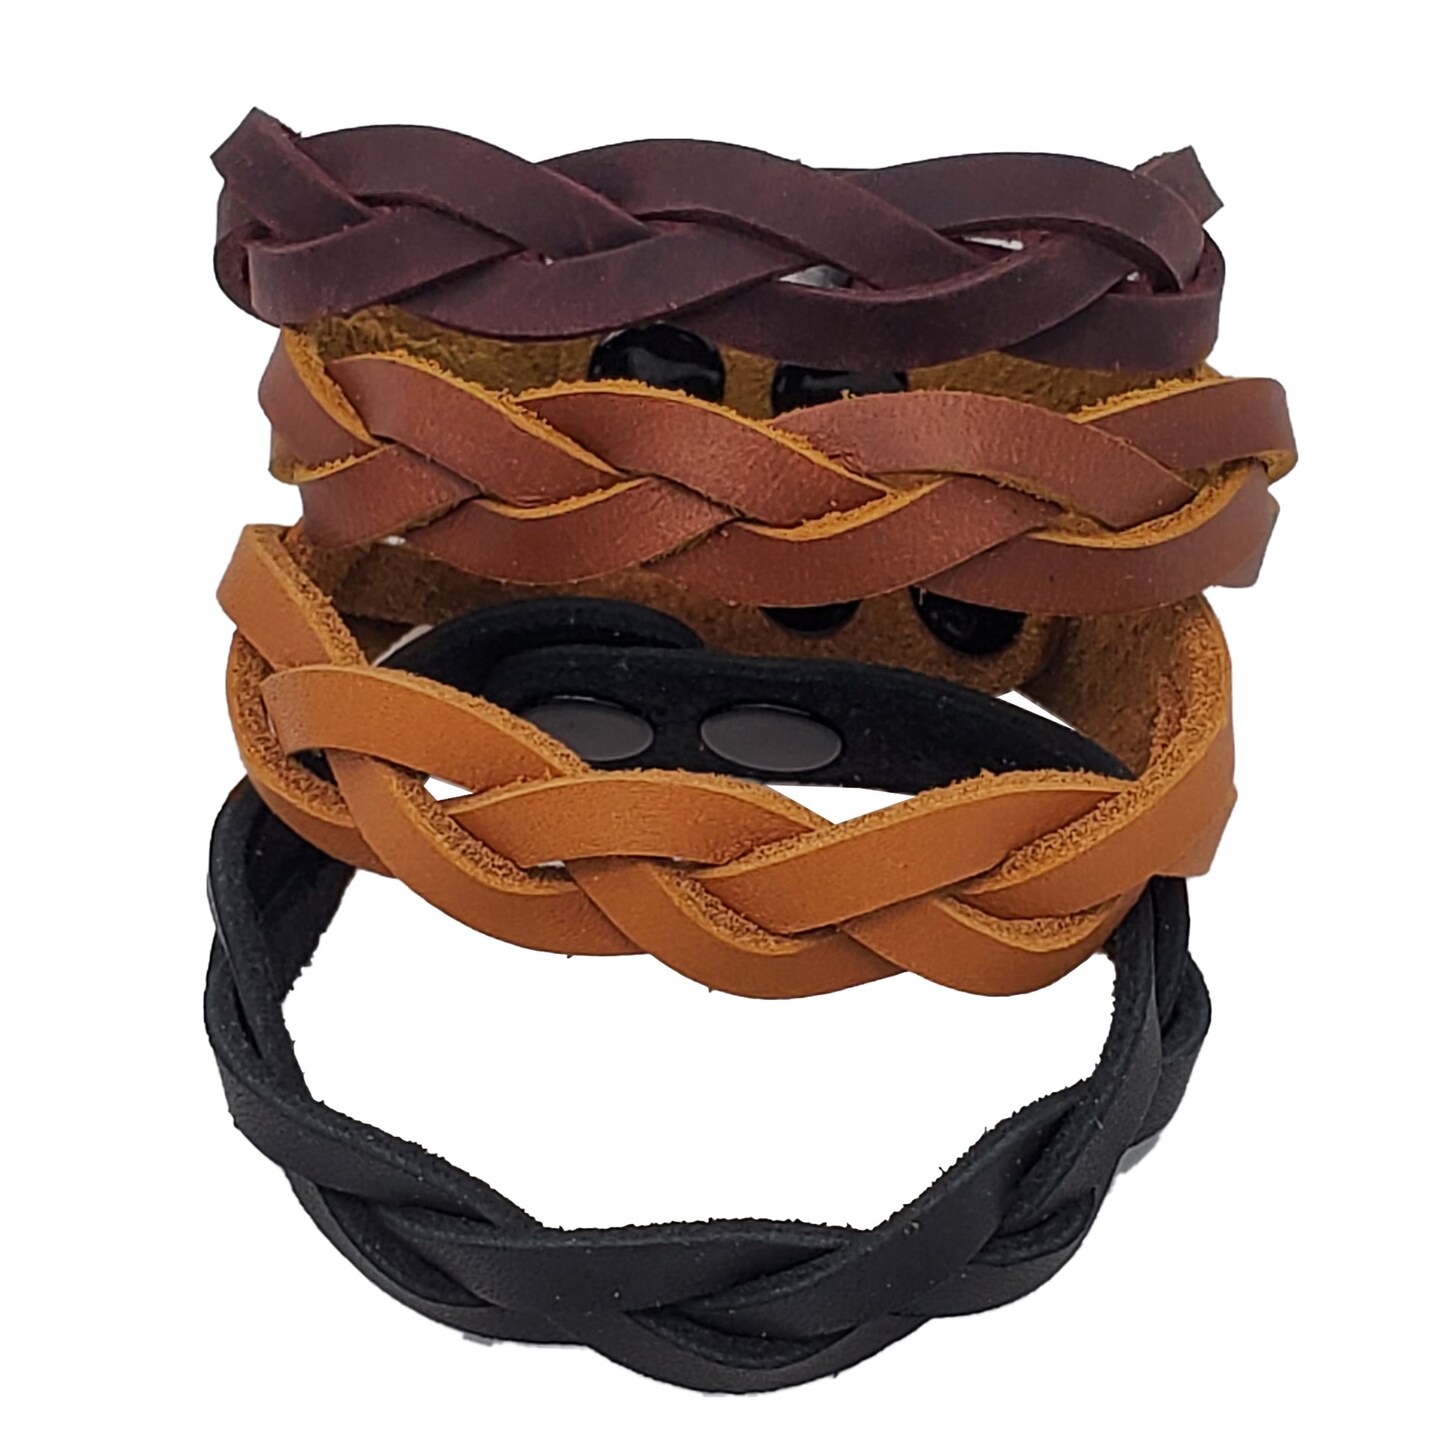 Narrow Leather Wristband Kit by ArtMinds™